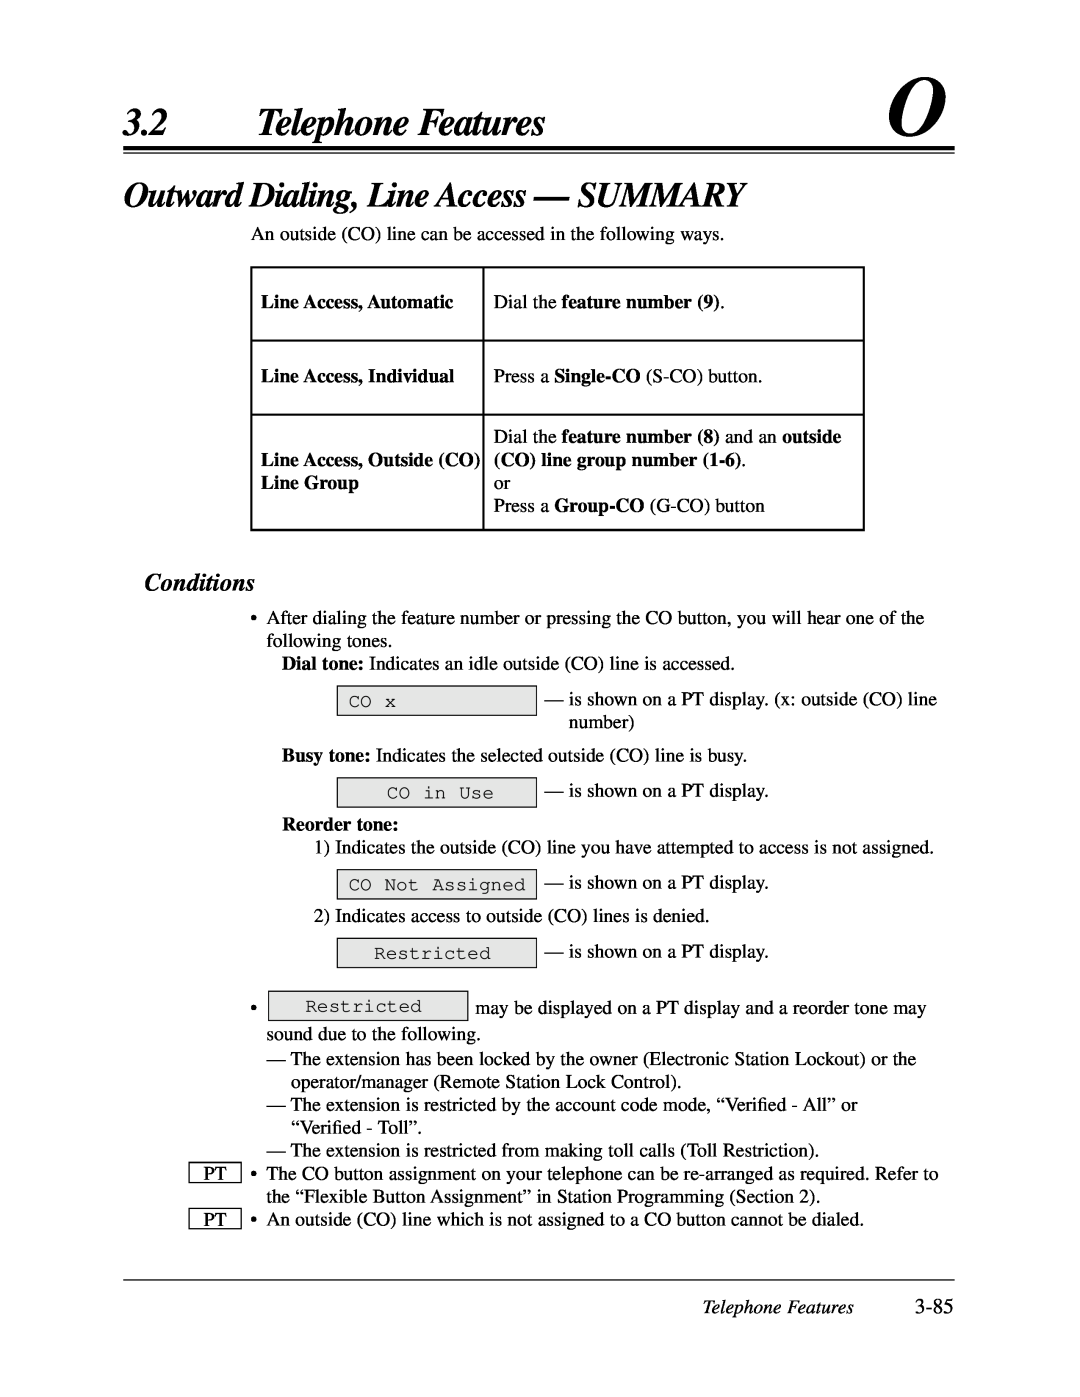 Panasonic KX-TA624 user manual Outward Dialing, Line Access — SUMMARY, 3-85, Telephone Features, Conditions 